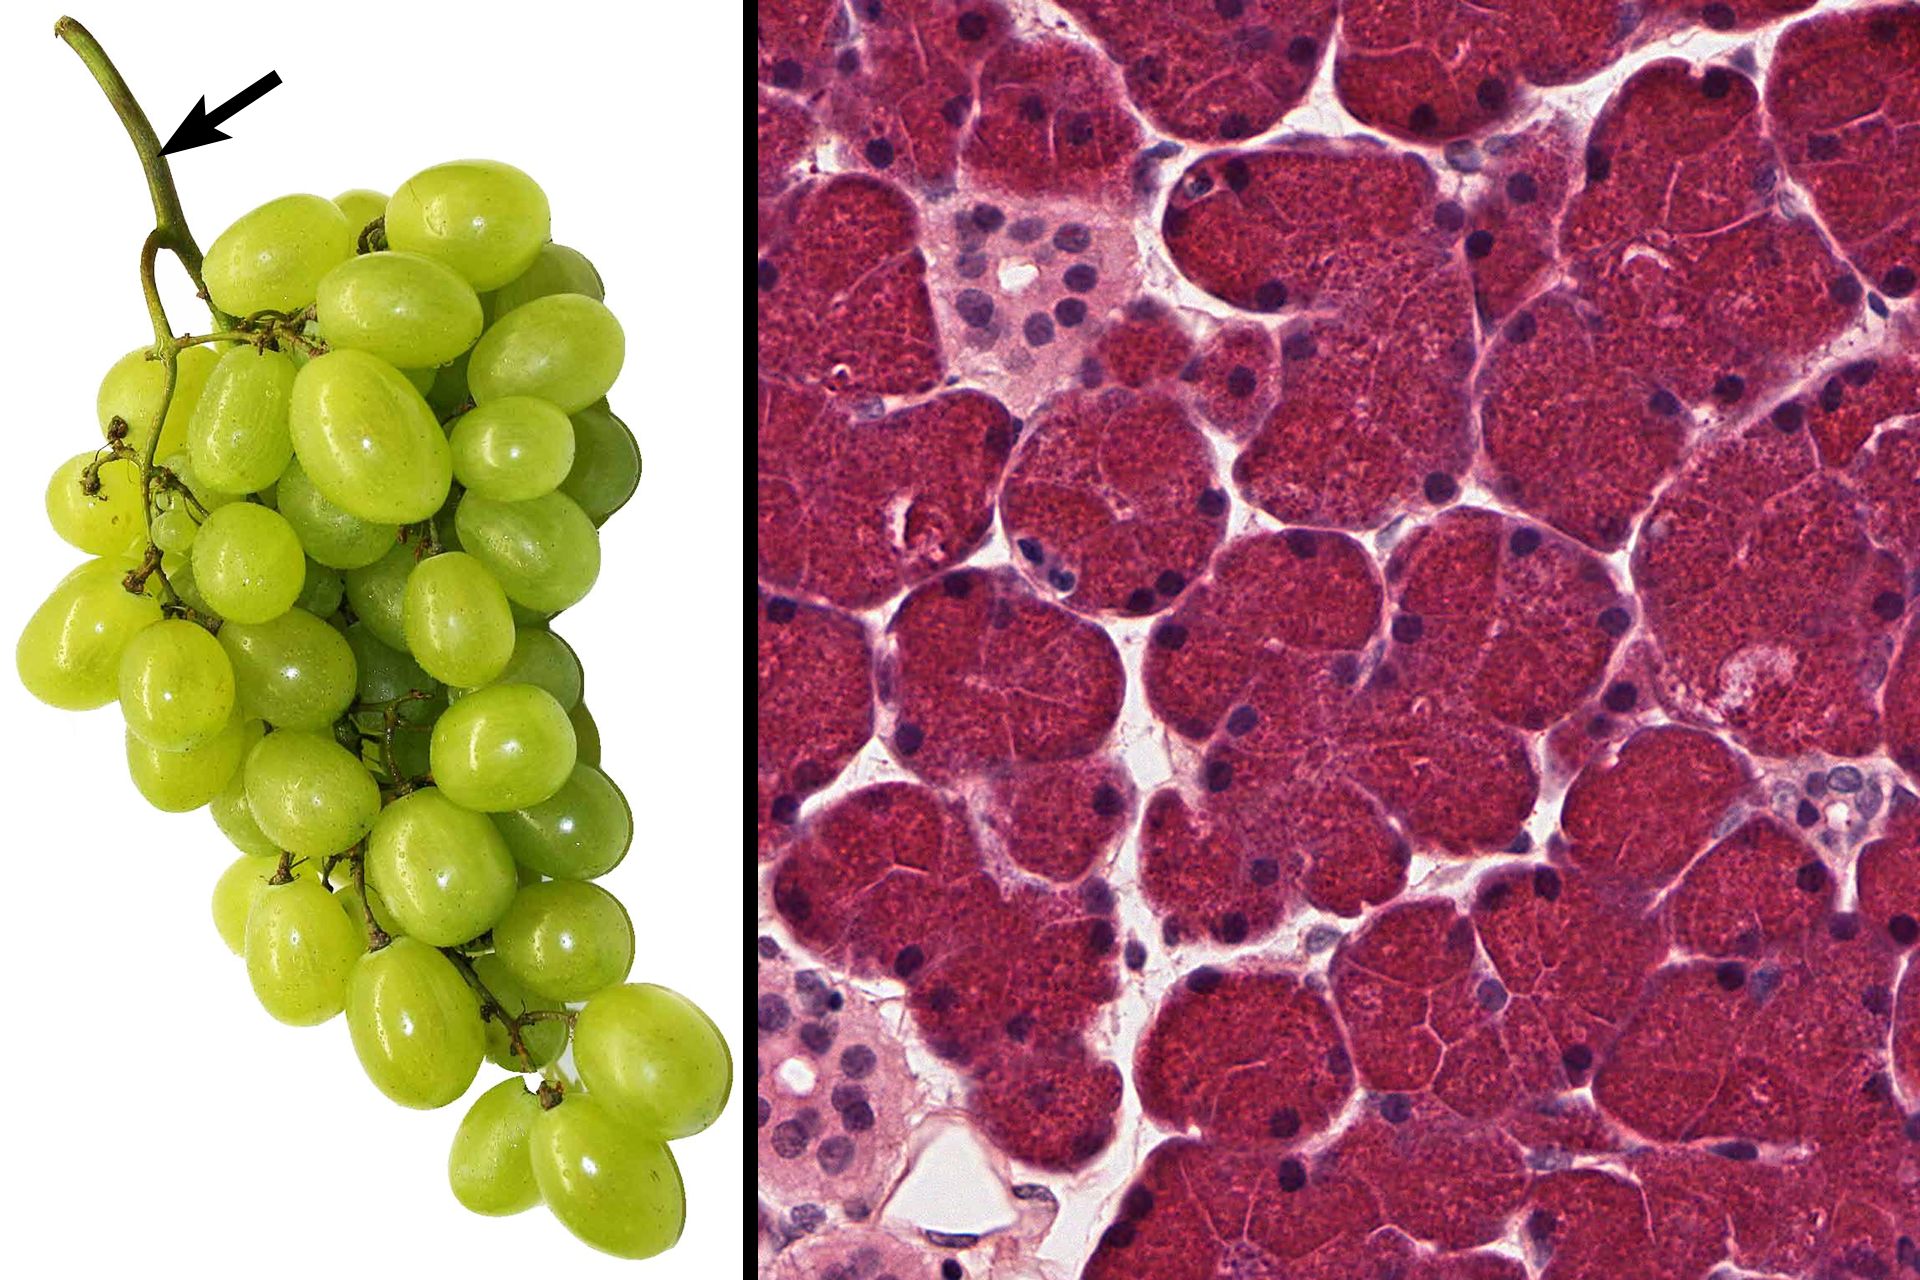  - Interlobular ducts <p>The structure of a compound acinar gland is analogous to the organization of a bunch of grapes.  Each bunch represents a lobule with individual grapes corresponding to acini.  Smaller stems connecting to the grapes denote intralobular ducts with the larger stems representing the interlobular duct.  It’s helpful to keep this similarity in mind when interpreting tissue sections of compound glands.</p>
